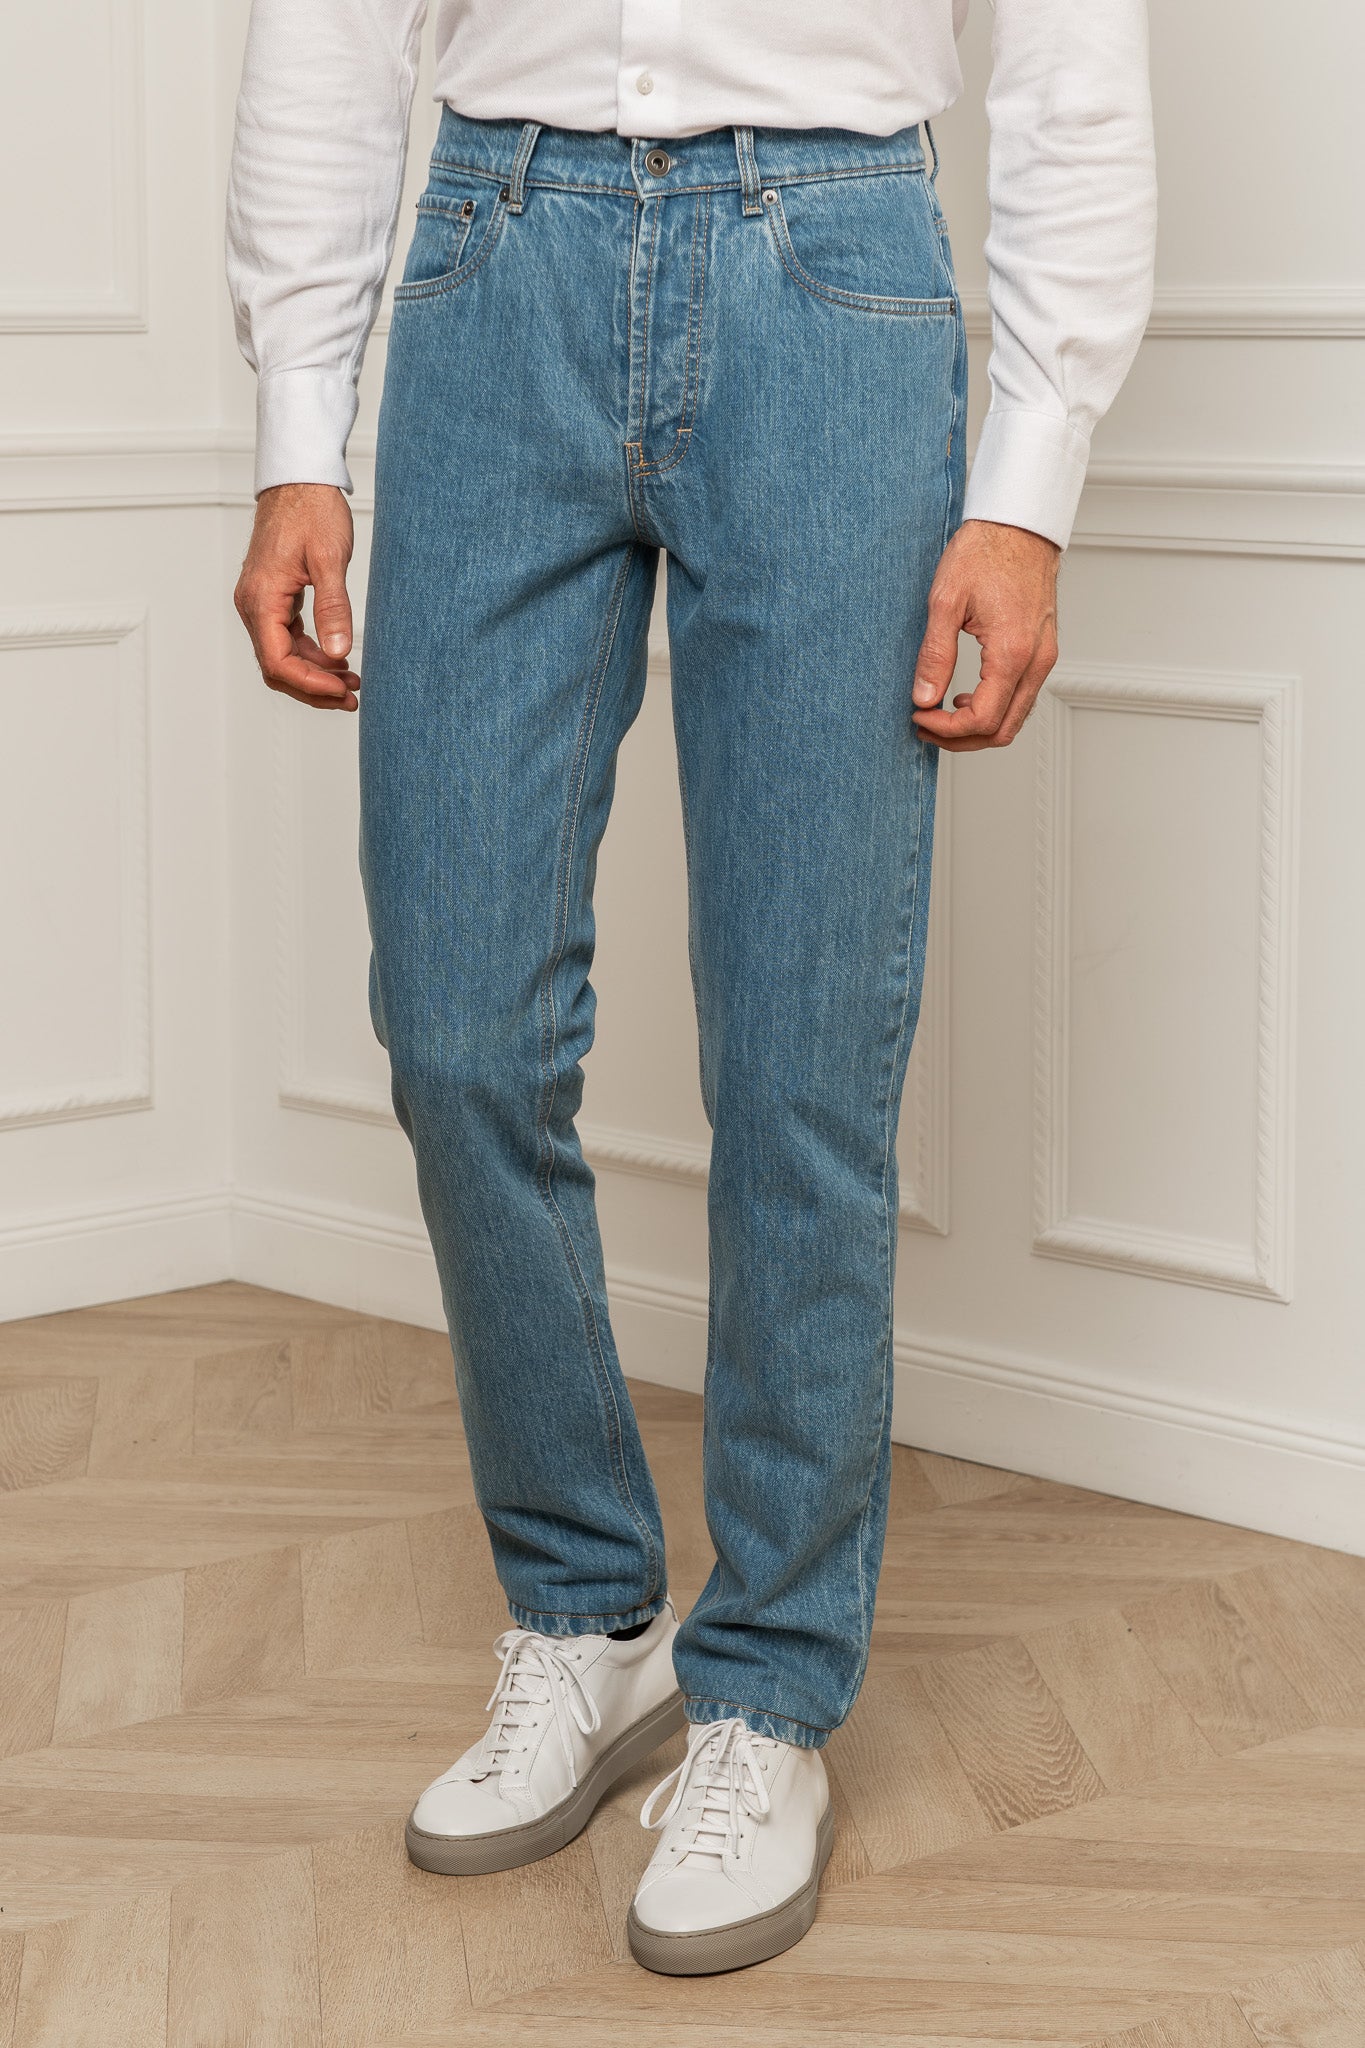  Blue Jeans, Jeans italiani, Jeans made in Italy, jeans vita alta, Jeans candiani, Jeans bleus, jeans italiens, jeans taille haute, jeans Candiani, Blue Jeans, Italian jeans, high-waisted jeans, Candiani jeans